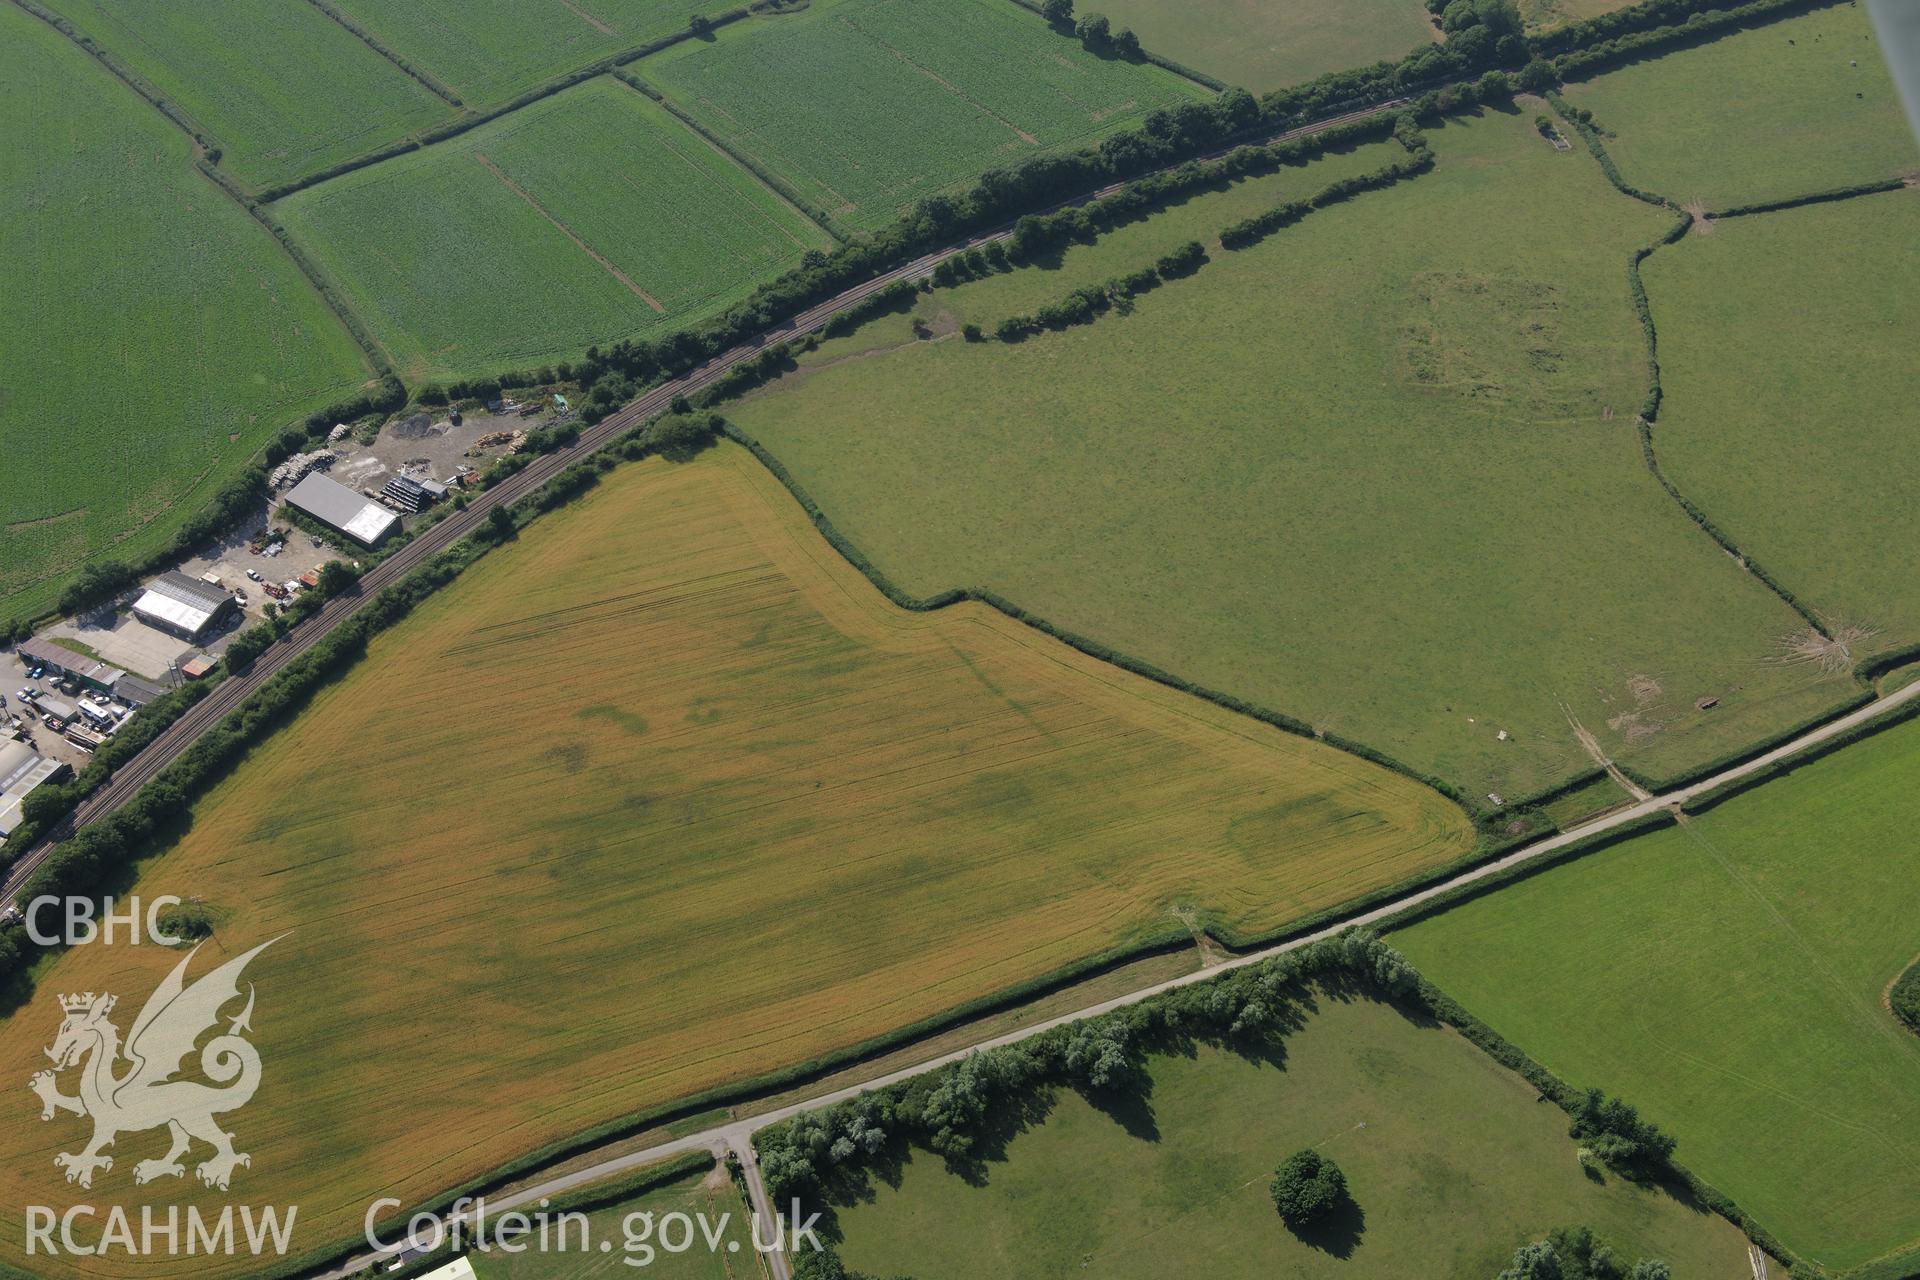 Caermead Roman villa and Morfa Lane cropmark enclosure, Caermead, north west of Llantwit Major. Oblique aerial photograph taken during the Royal Commission?s programme of archaeological aerial reconnaissance by Toby Driver on 1st August 2013.